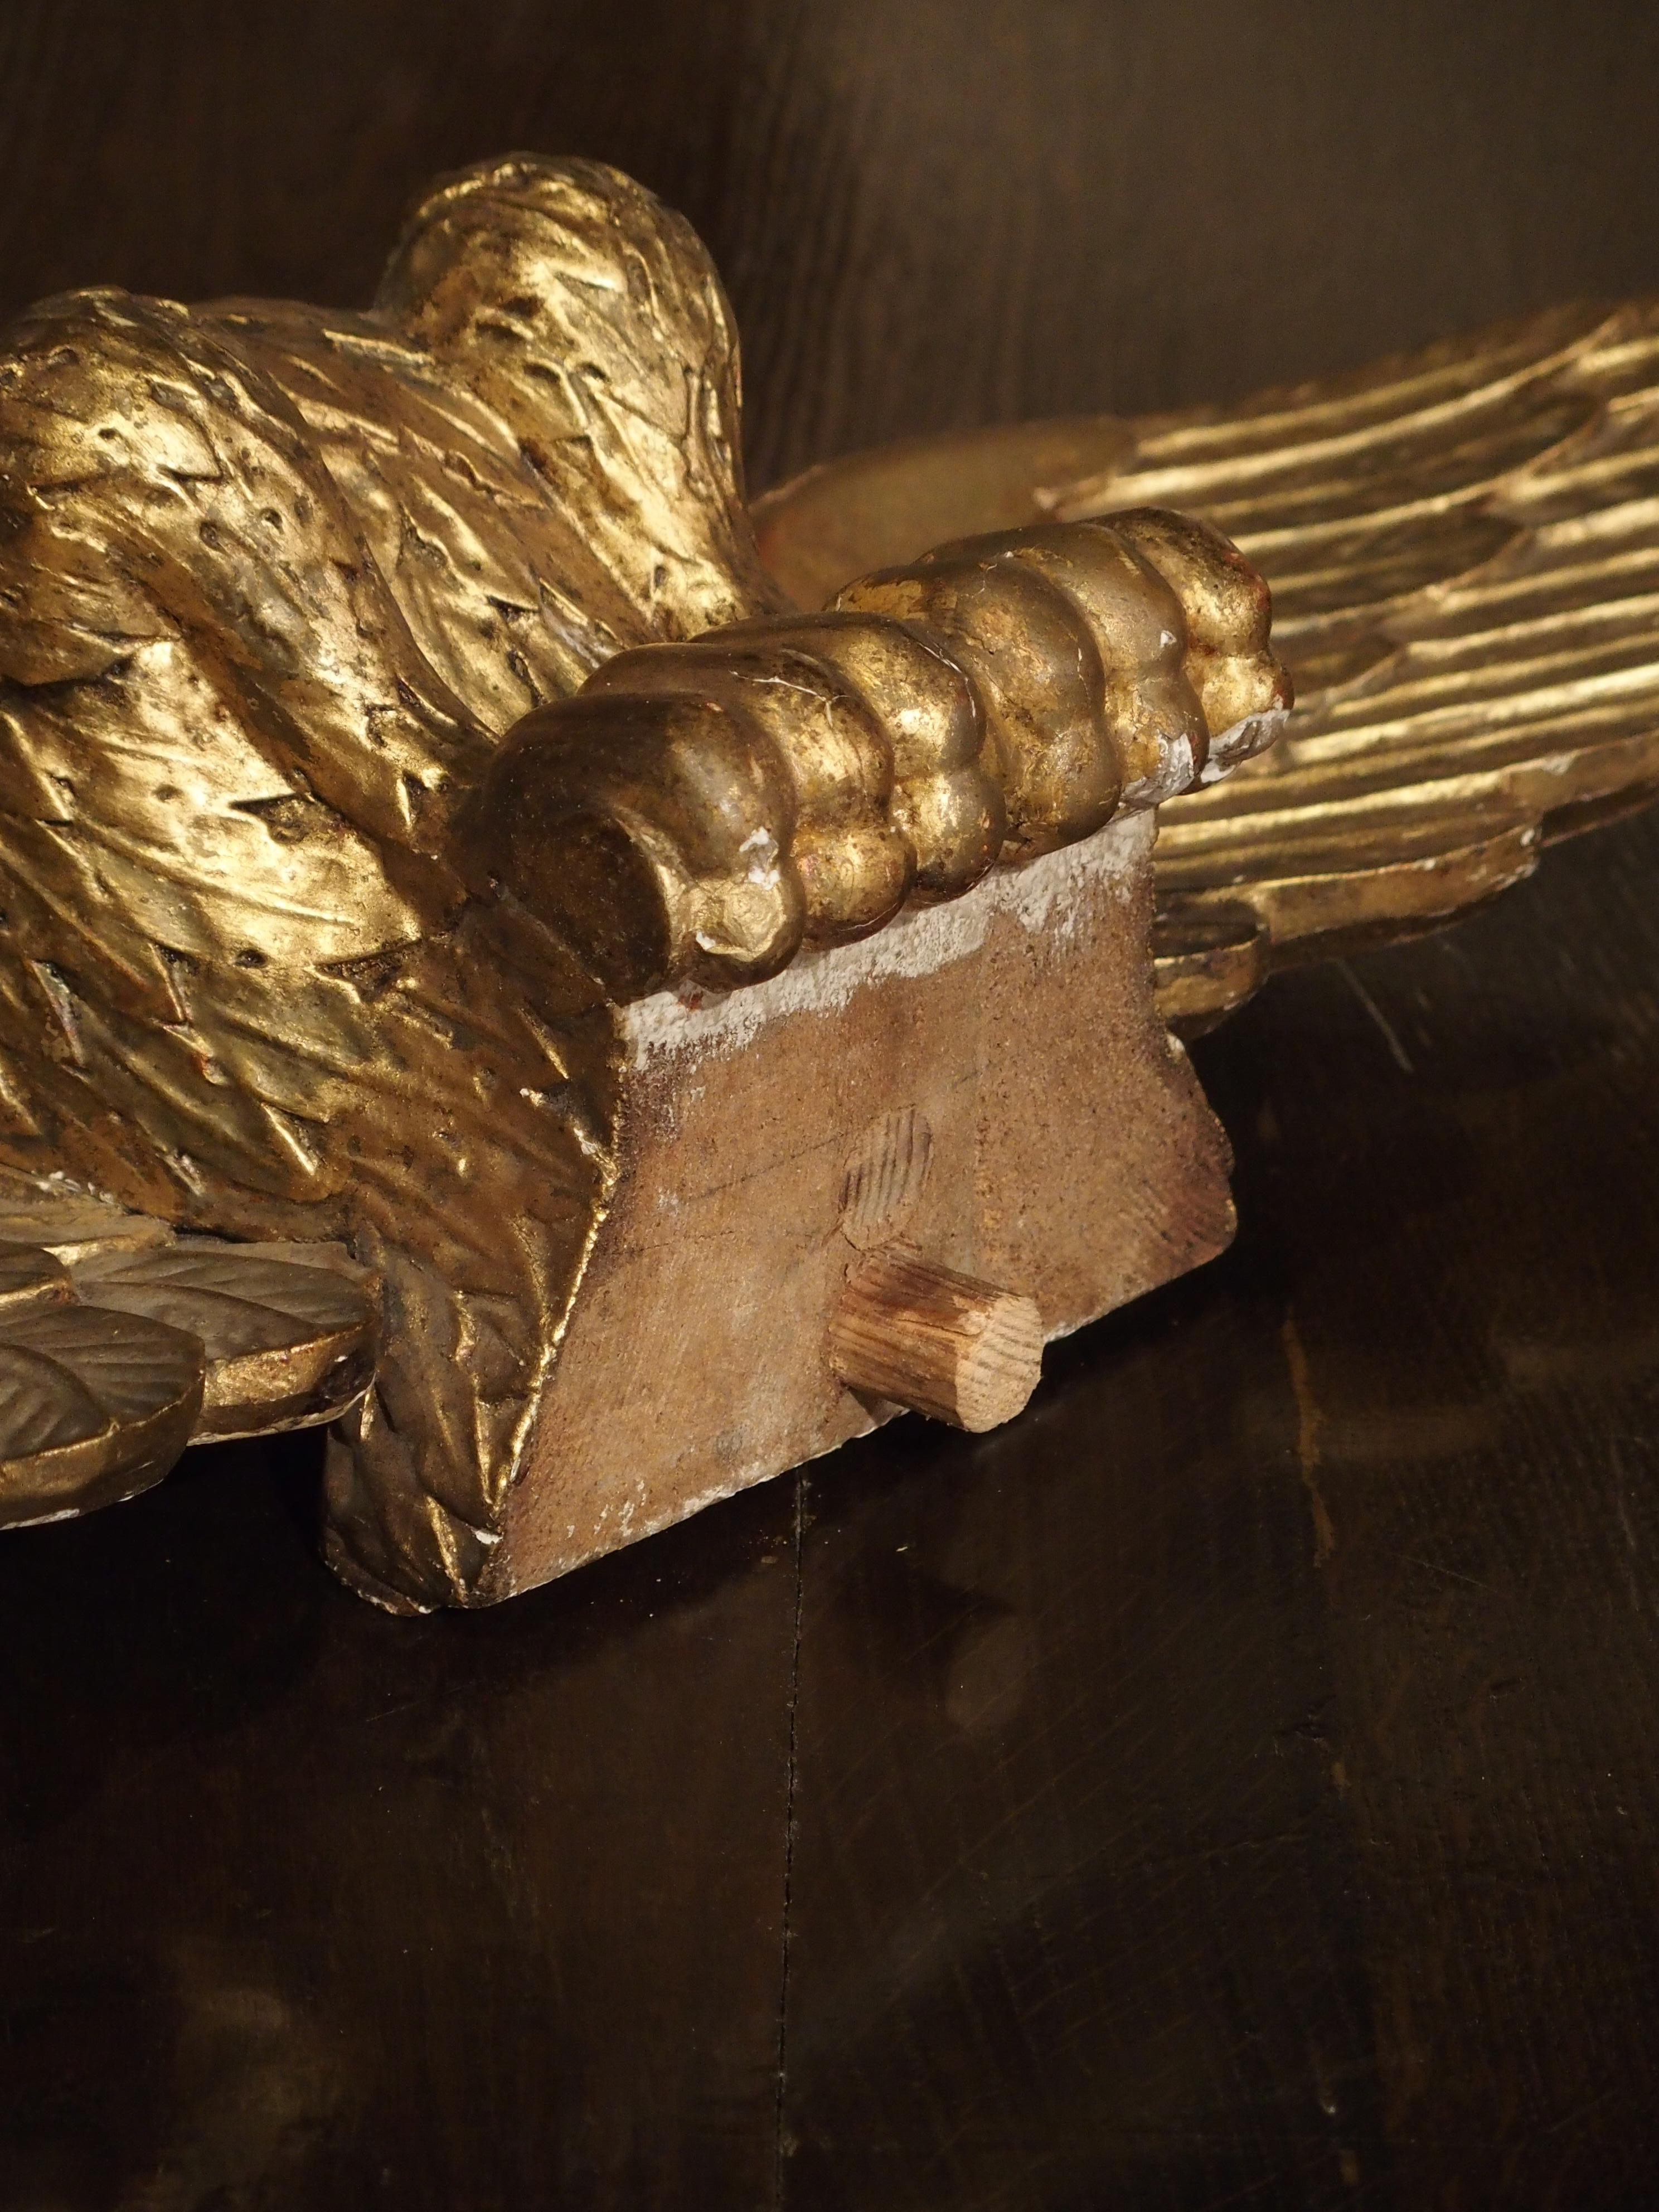 This carved giltwood eagle statue is portrayed with outstretched wings and legs pulled up as though just landing upon something. There is a wooden peg on the bottom of the statue indicating it was formerly pegged as ornamentation onto a much larger